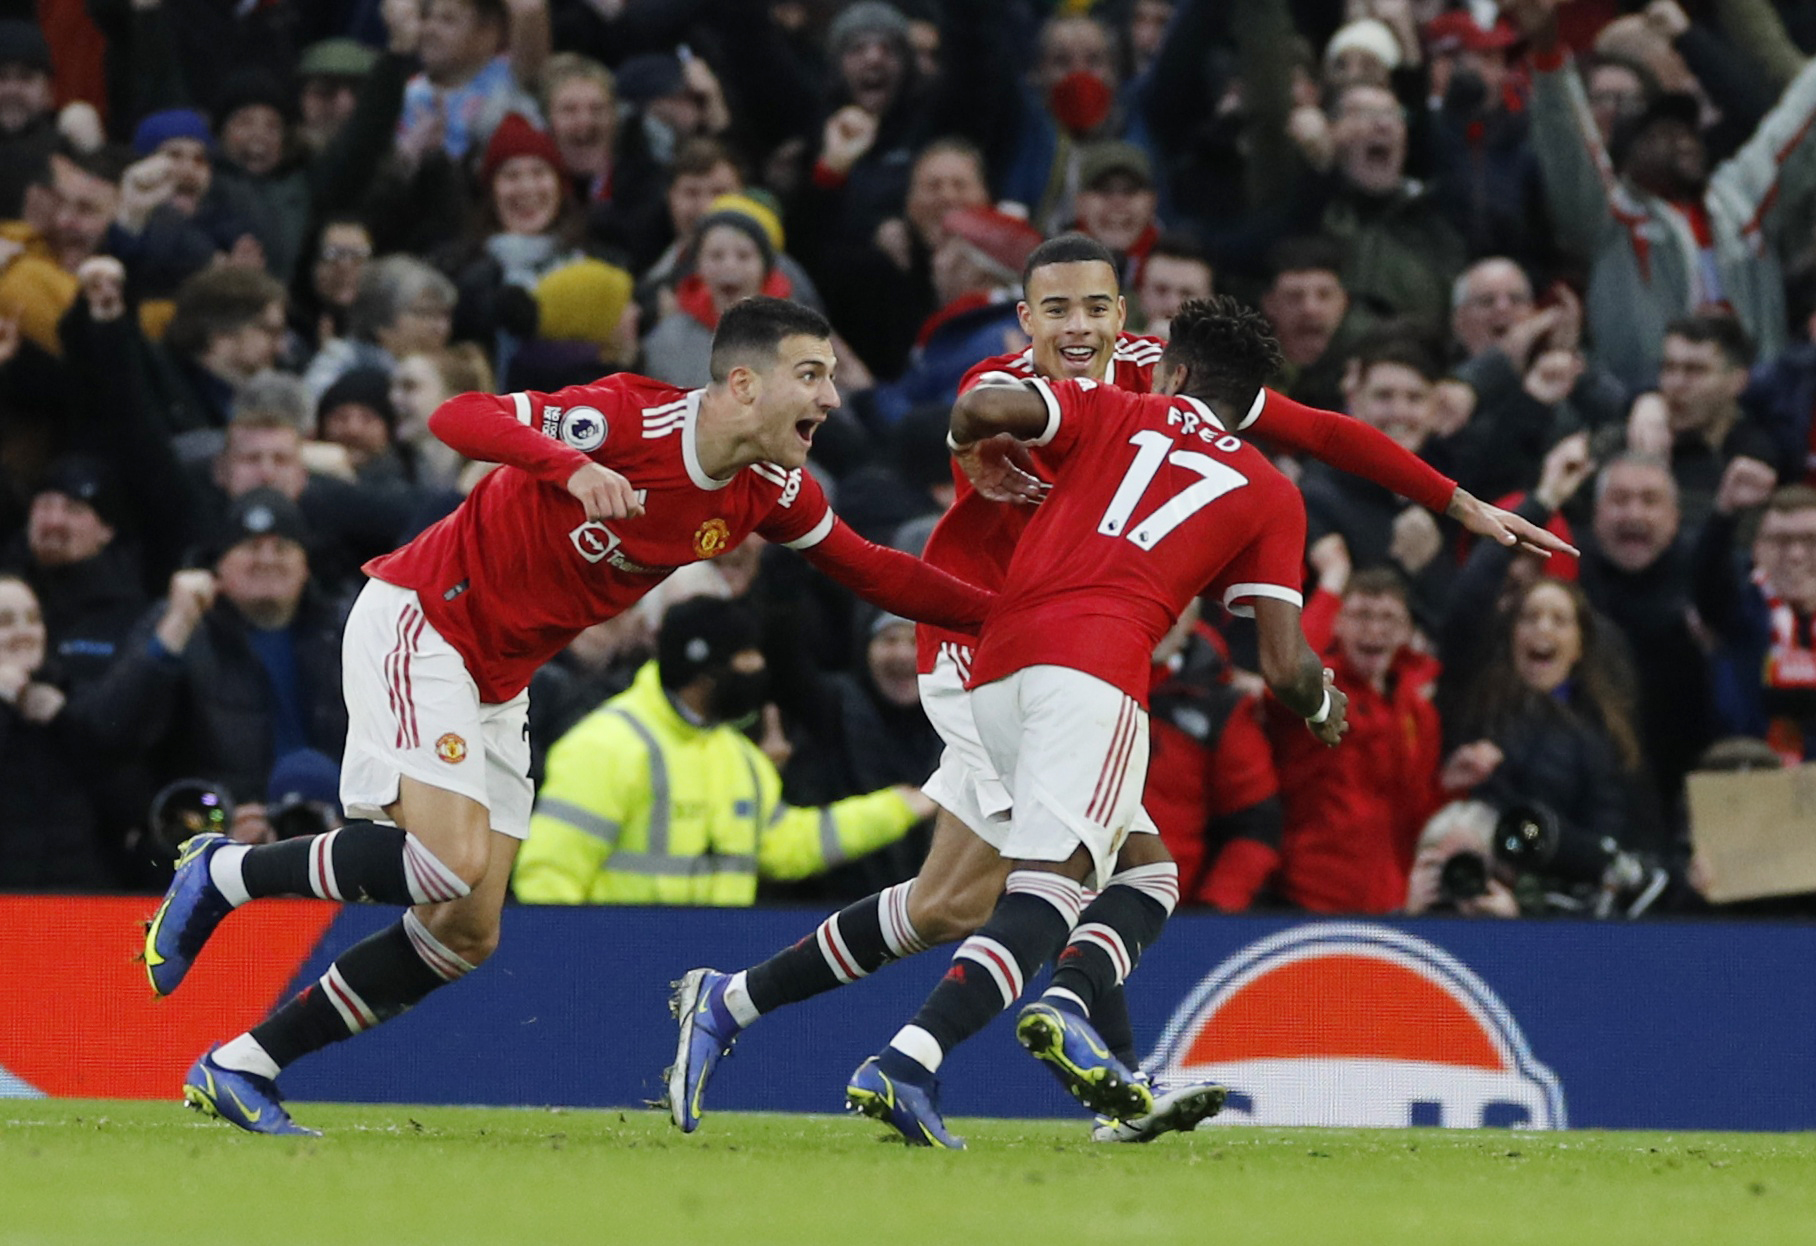 Soccer Football - Premier League - Manchester United v Crystal Palace - Old Trafford, Manchester, Britain - December 5, 2021 Manchester United's Fred celebrates scoring their first goal with Mason Greenwood and Diogo Dalot REUTERS/Phil Noble  